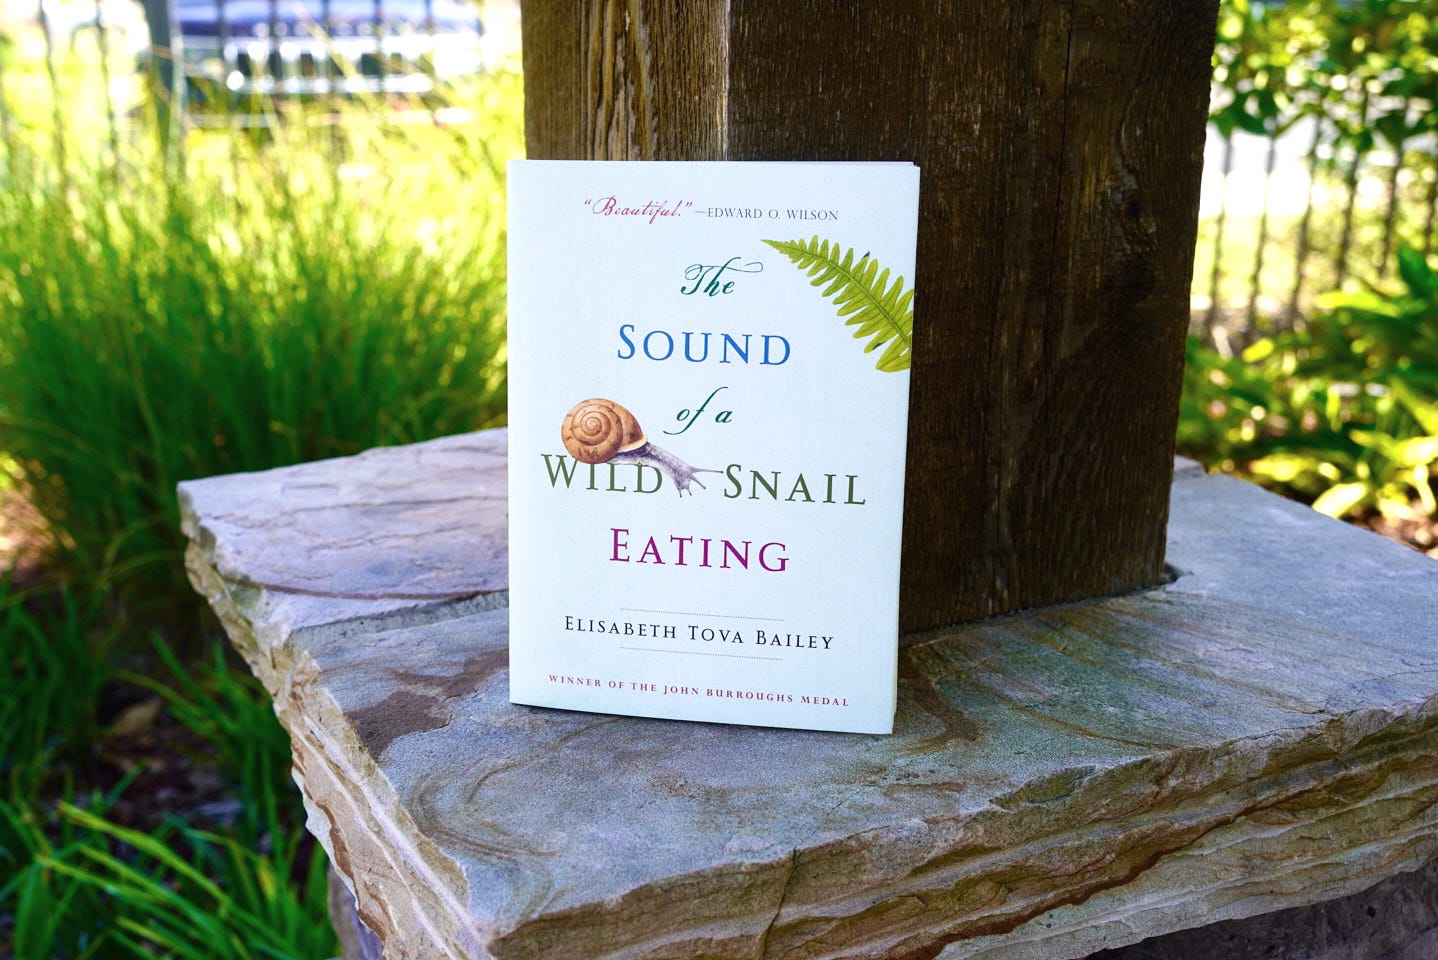 a photo of the book The Sound of a Wild Snail Eating sitting on a stone shelf near a wooden beam